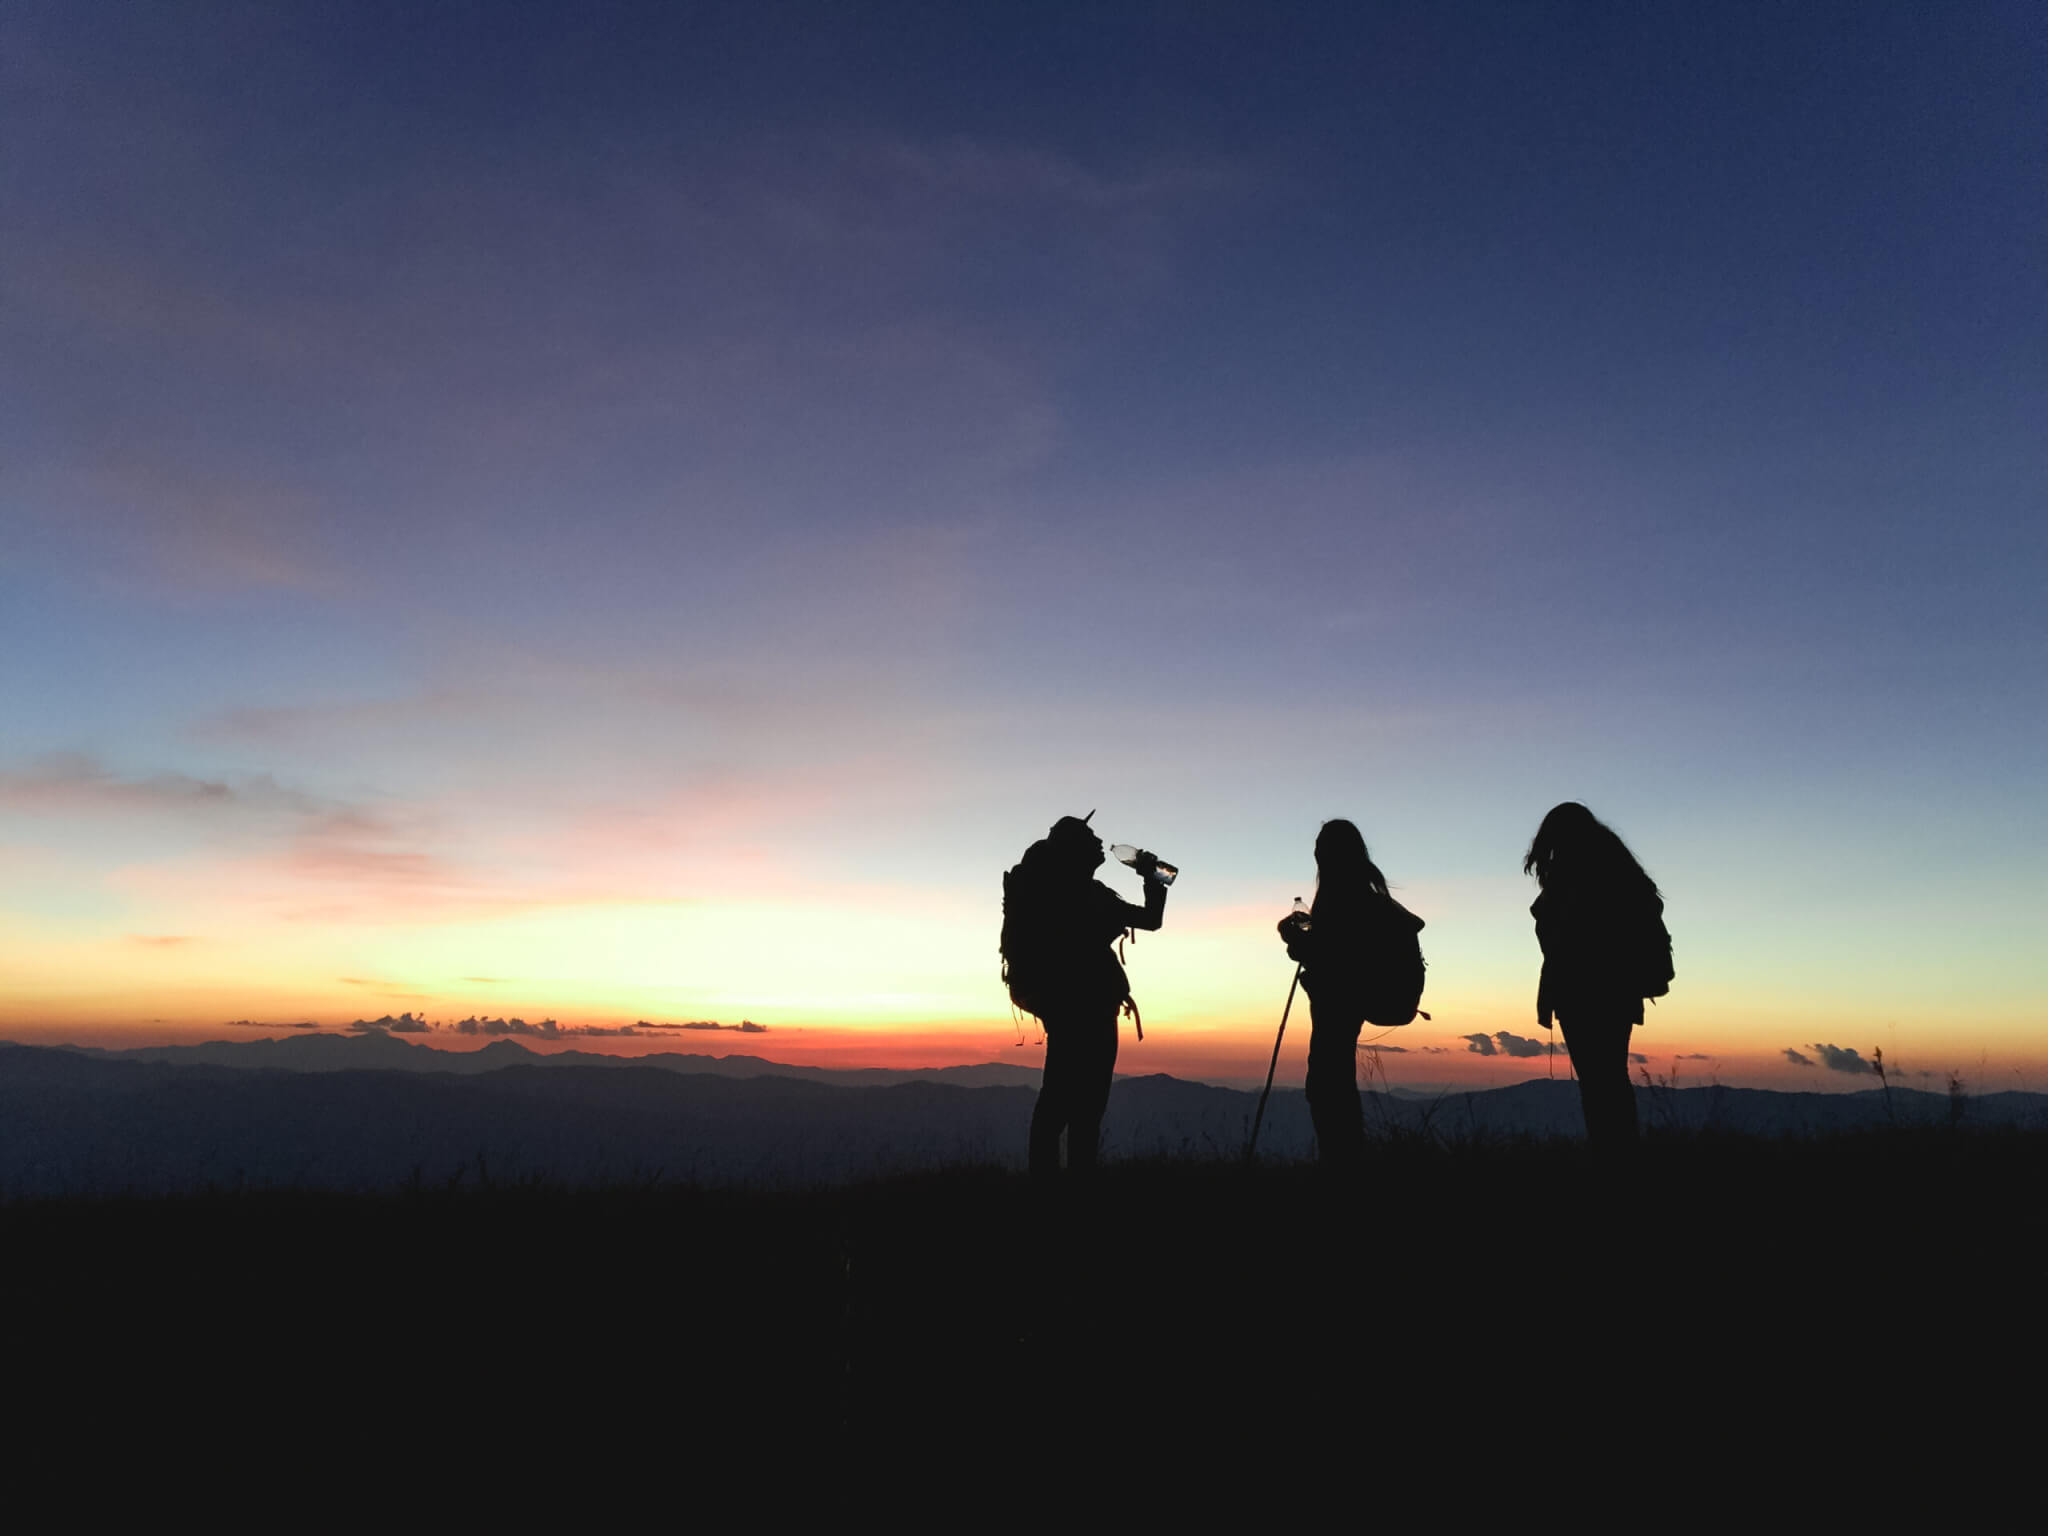 Silhouette of three people